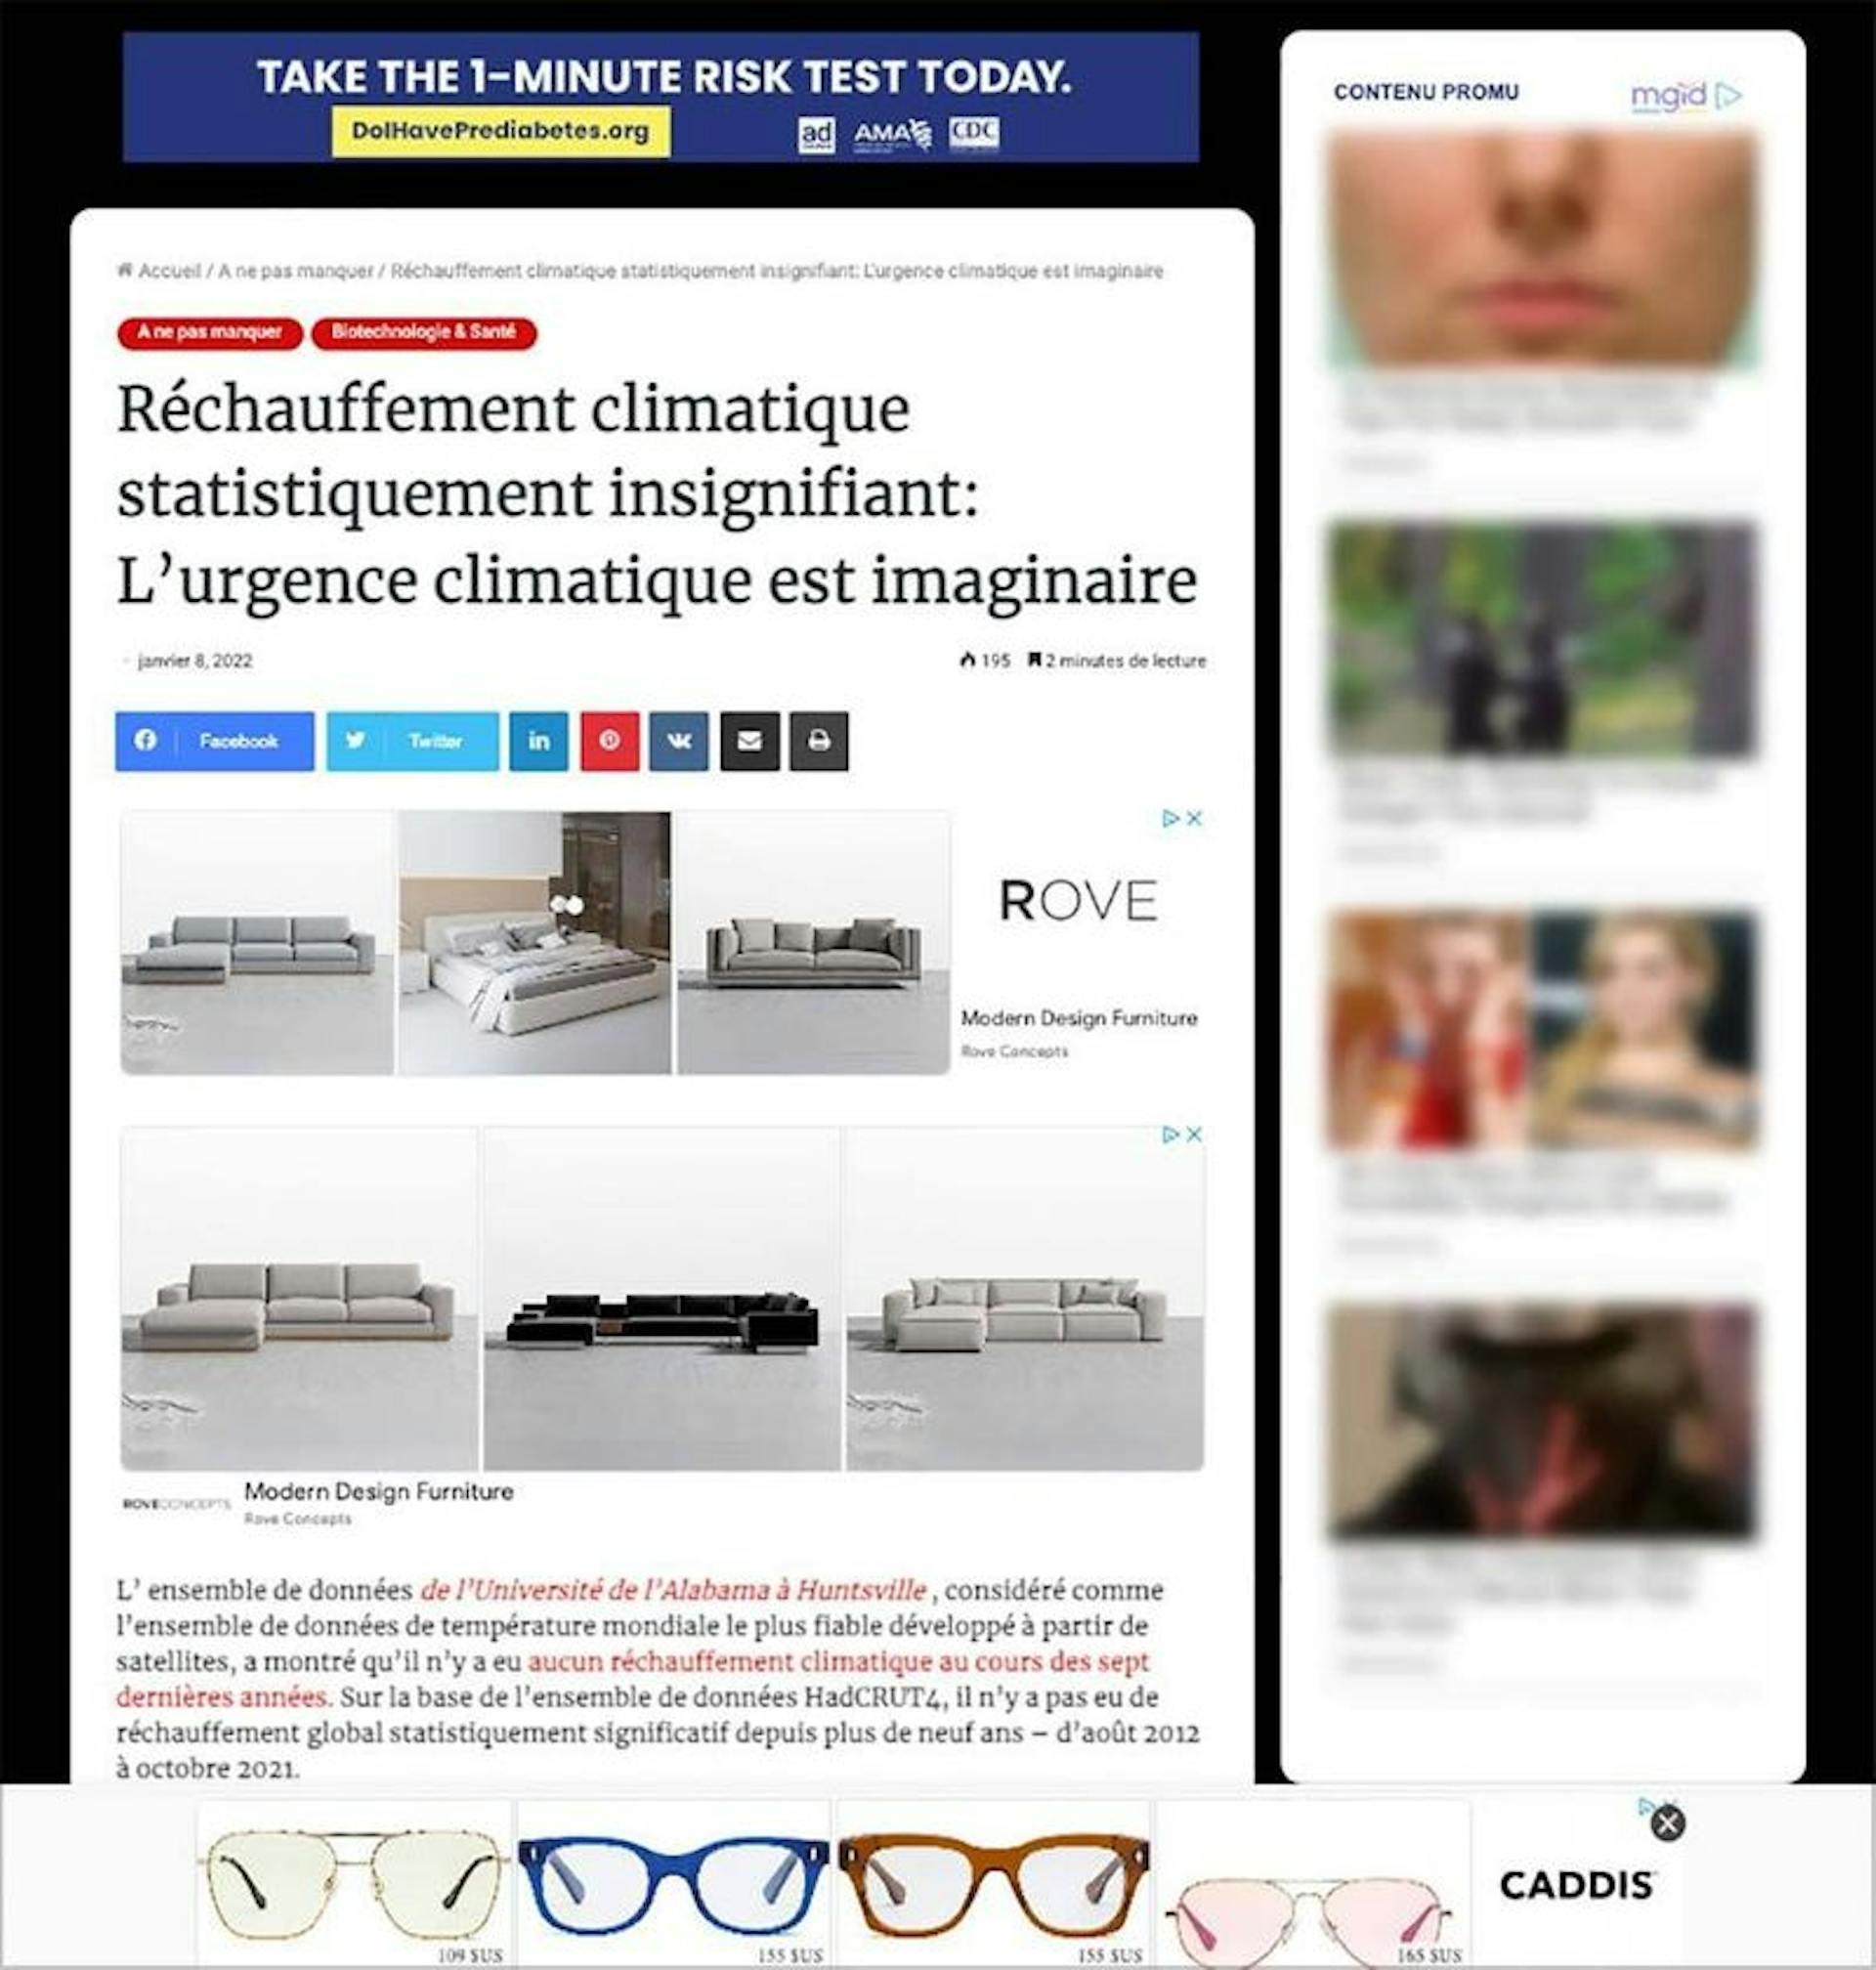 A story with false claims about climate change had ads for eyewear company Caddis and furniture maker Rove and a health PSA from the Centers for Disease Control and Prevention, the American Medical Association and the Ad Council, an ad industry association. Credit: ProPublica screenshot